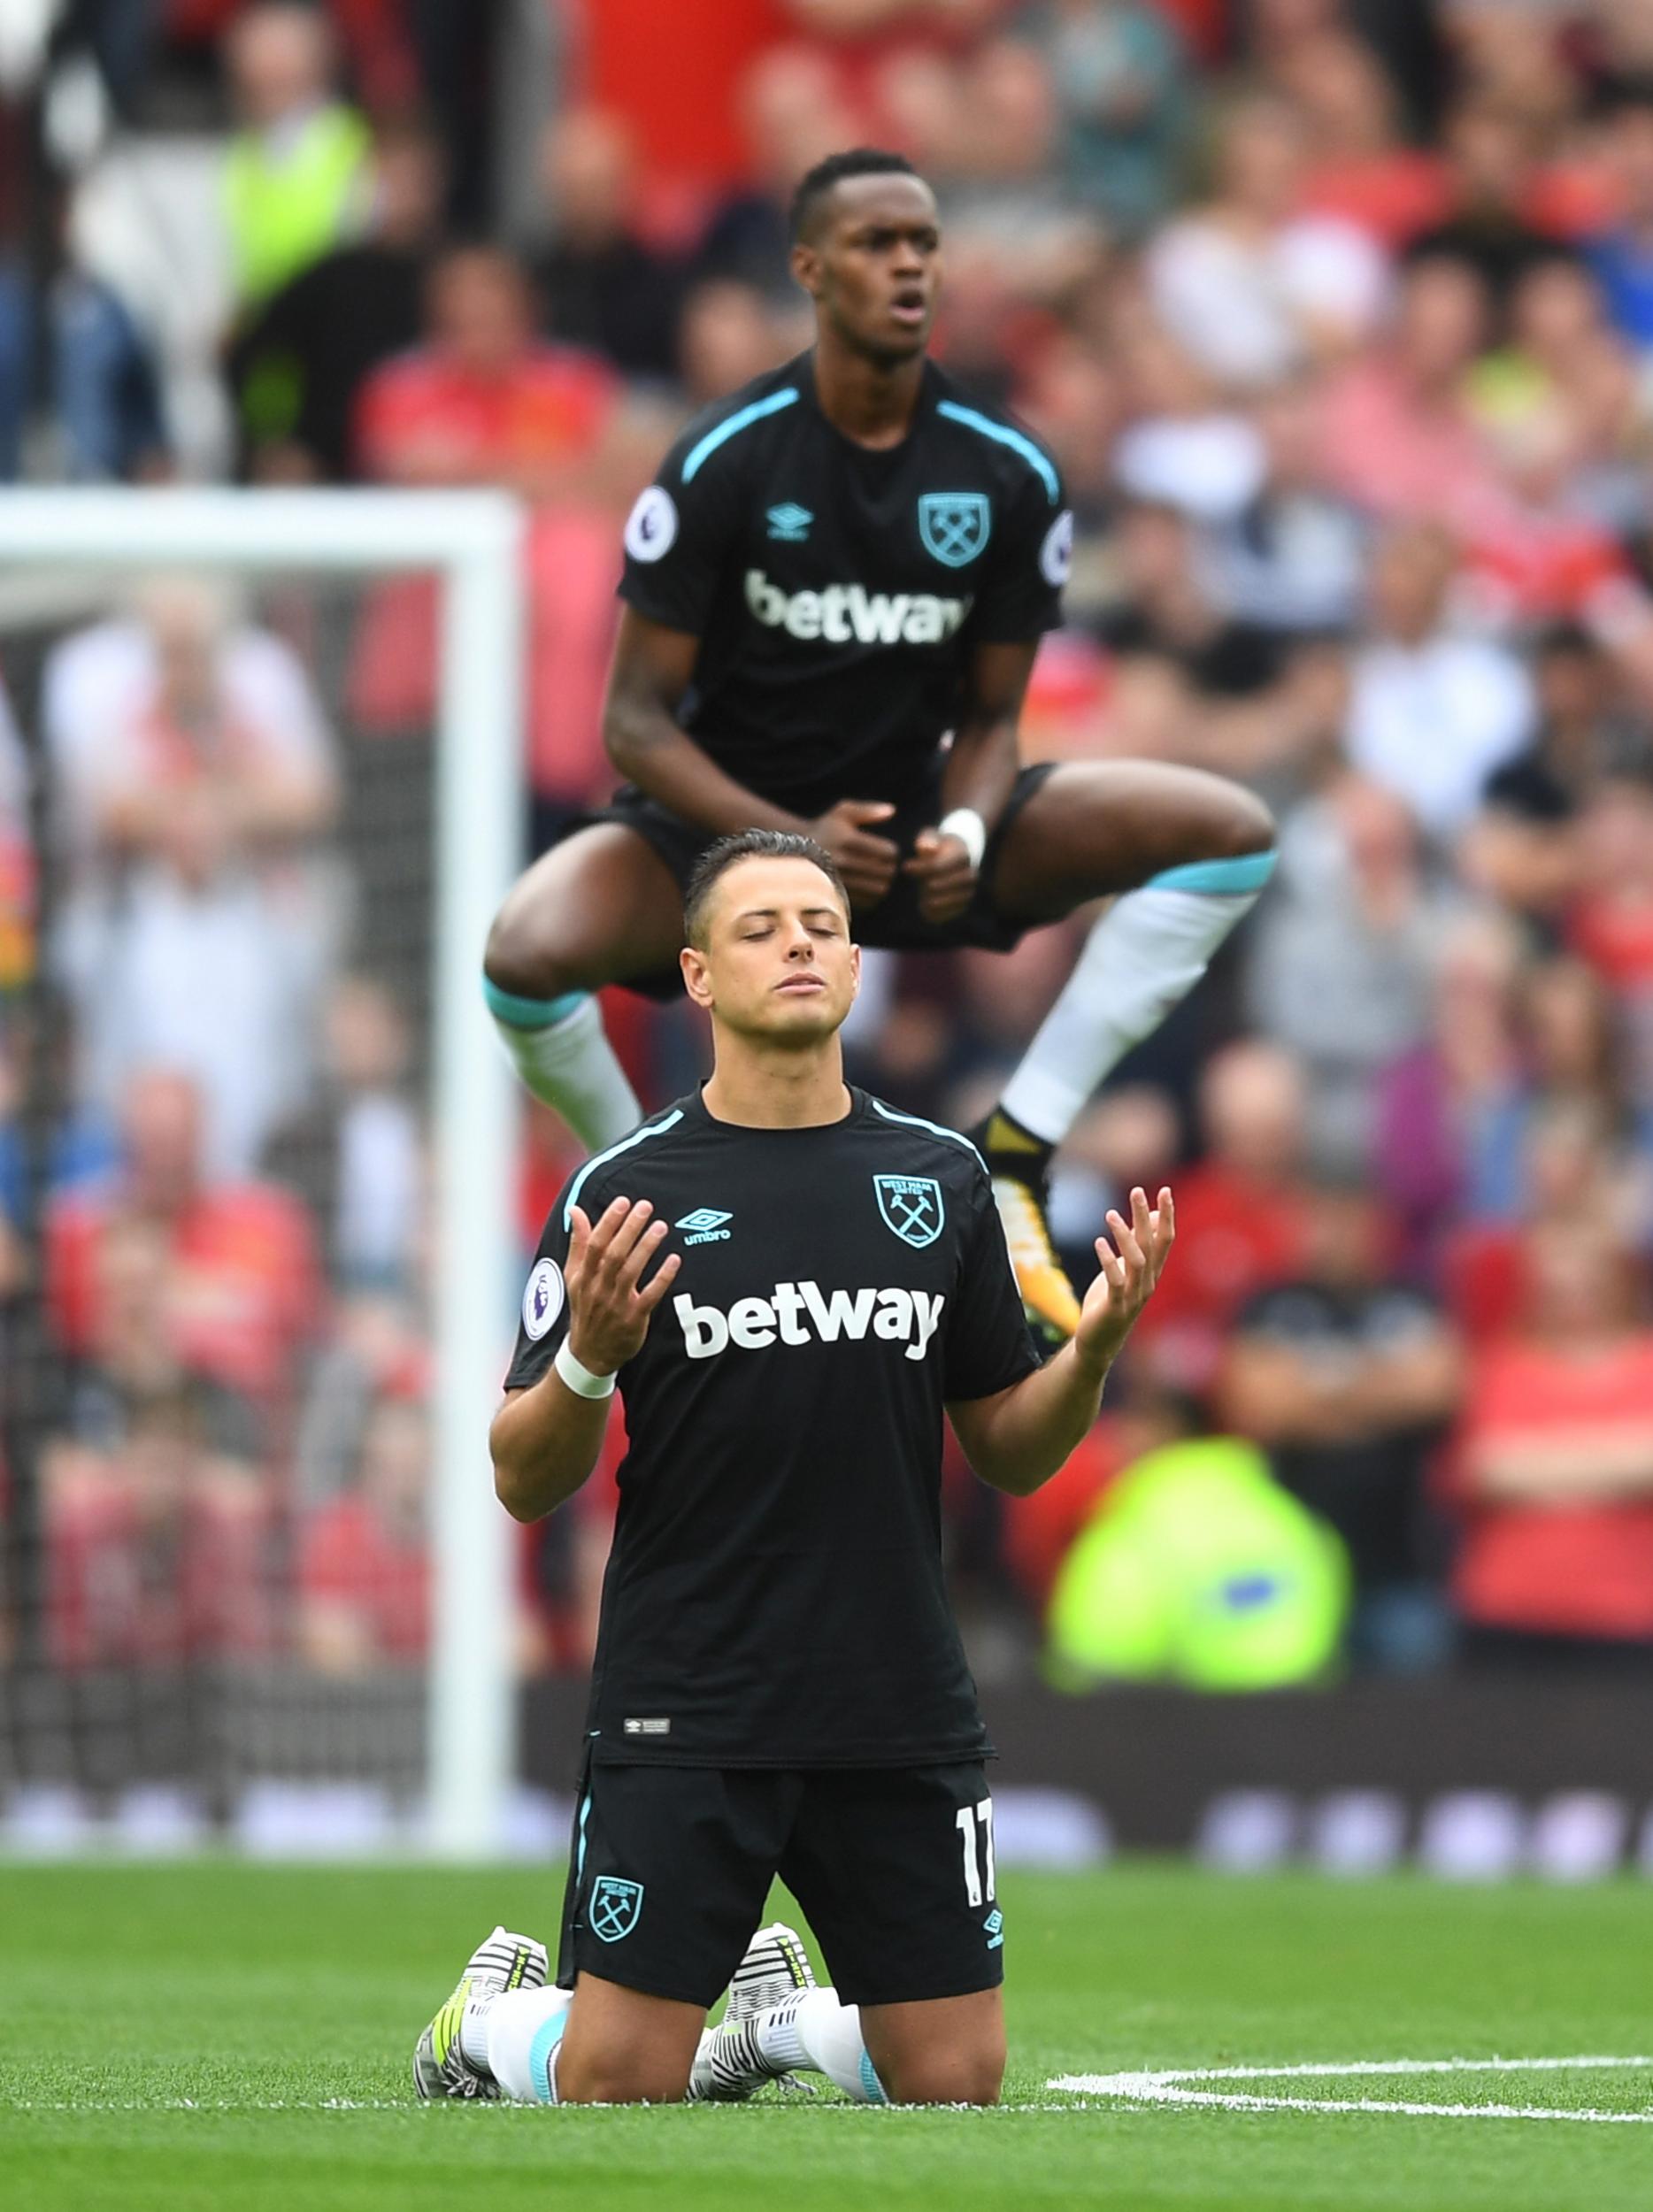 Hernandez cannot be expected to carry his team mates alone